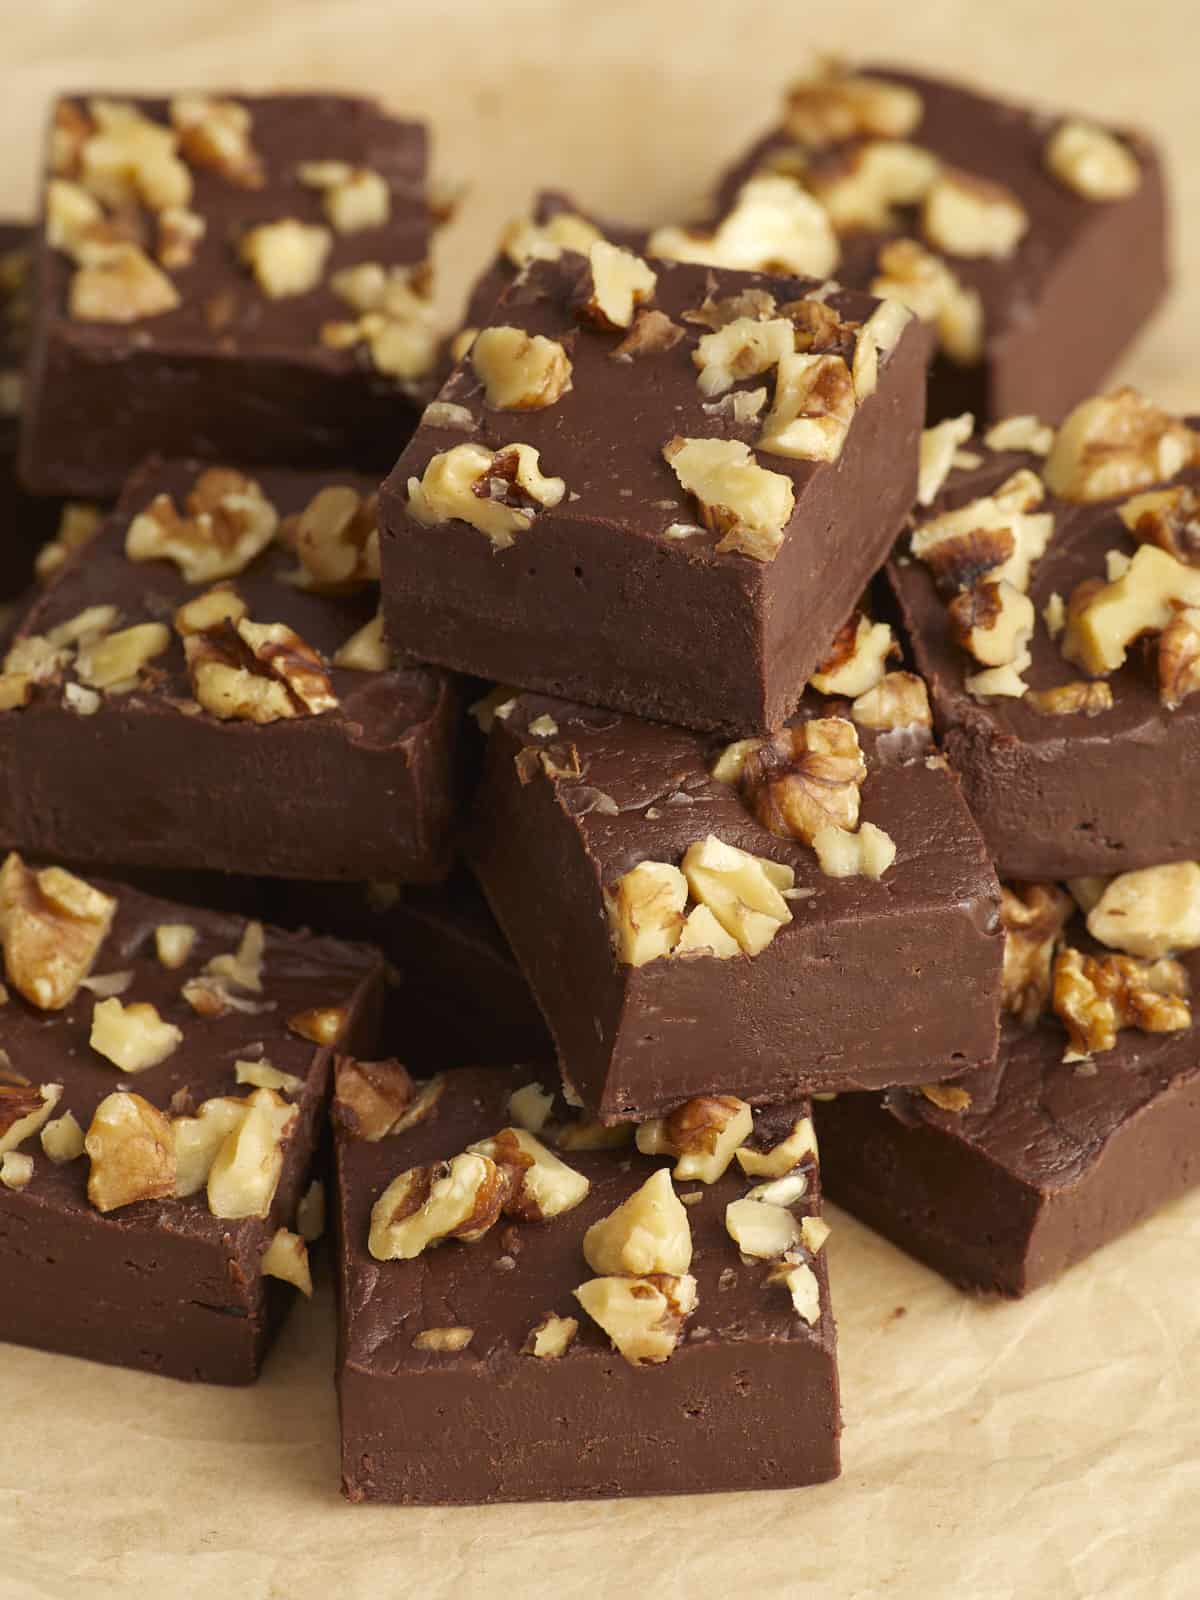 Side view of a pile of chocolate fudge squares with walnuts on top.